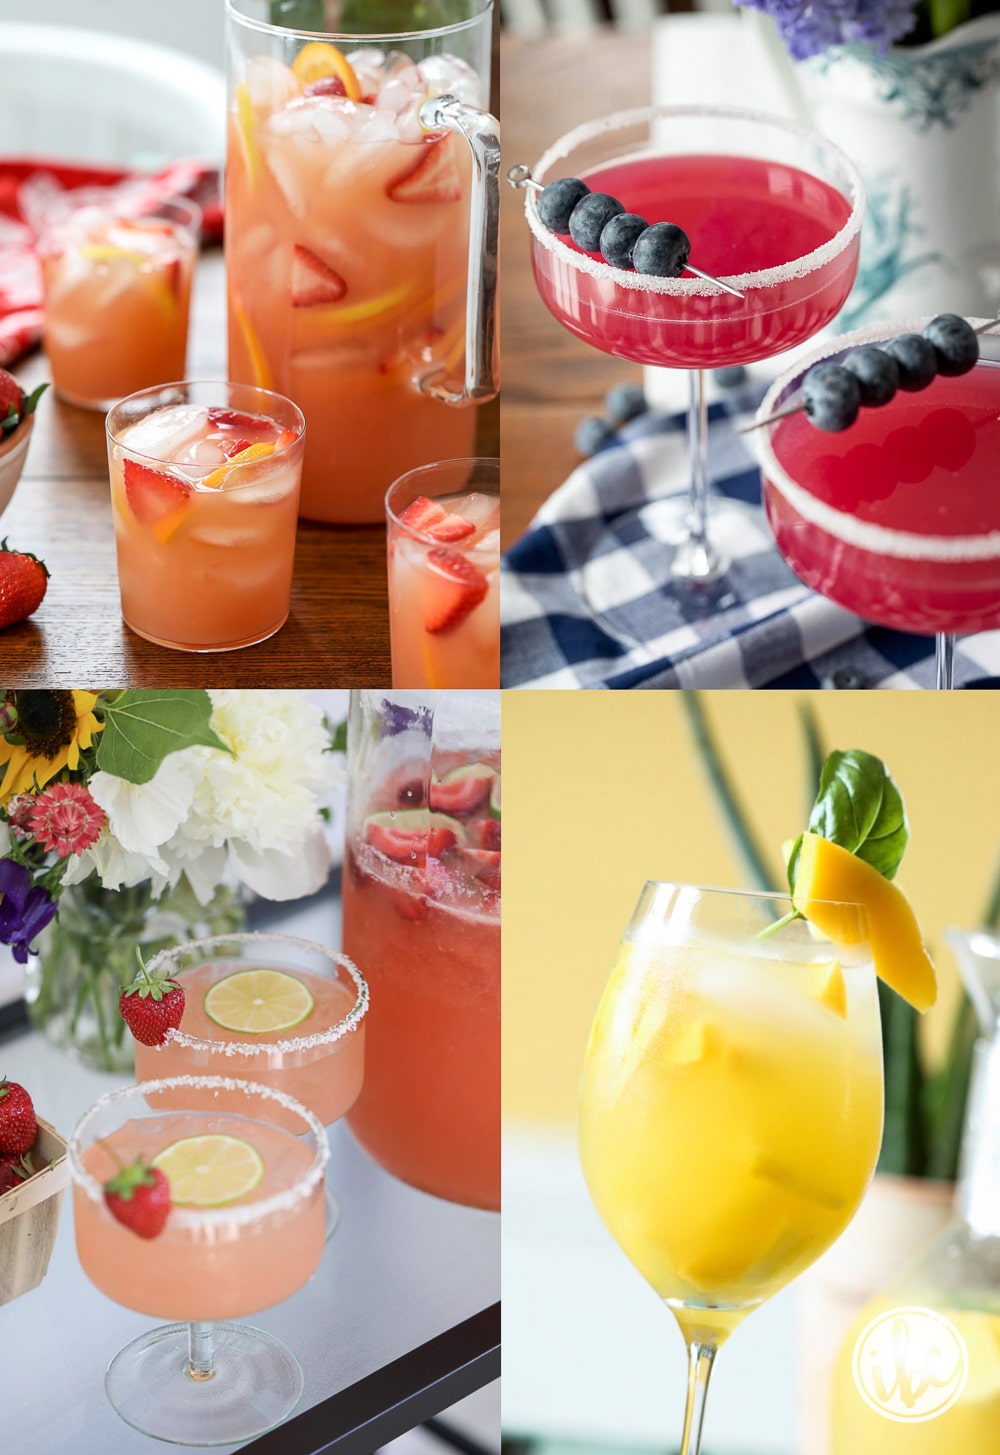 four of the best summer cocktail images of sangria, martinis, and a margarita.